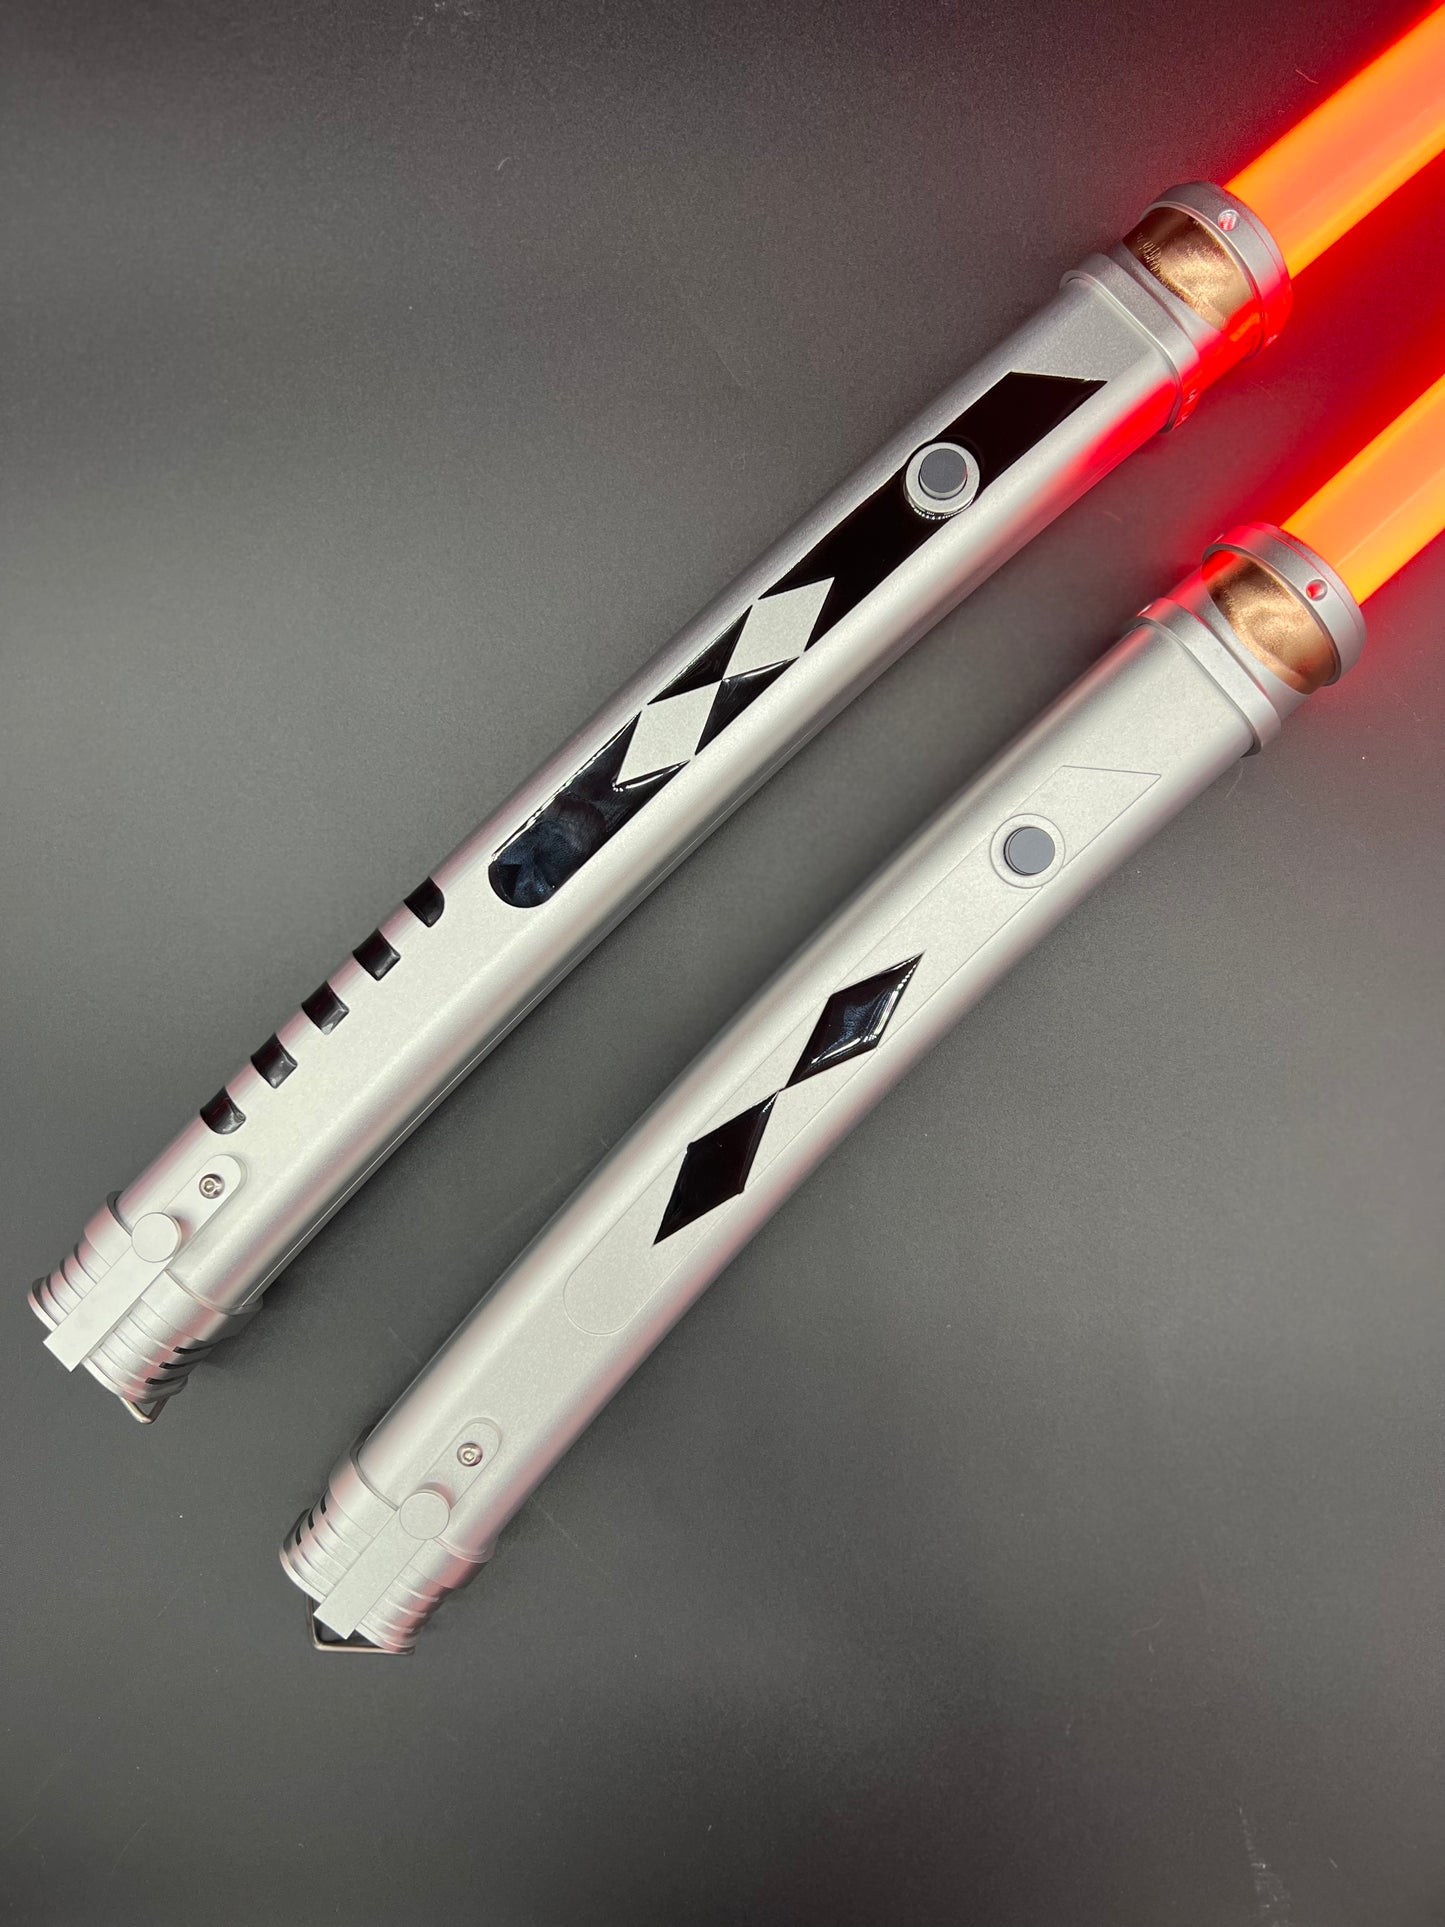 THE FULCRUM TANO LIGHTSABER PAIR